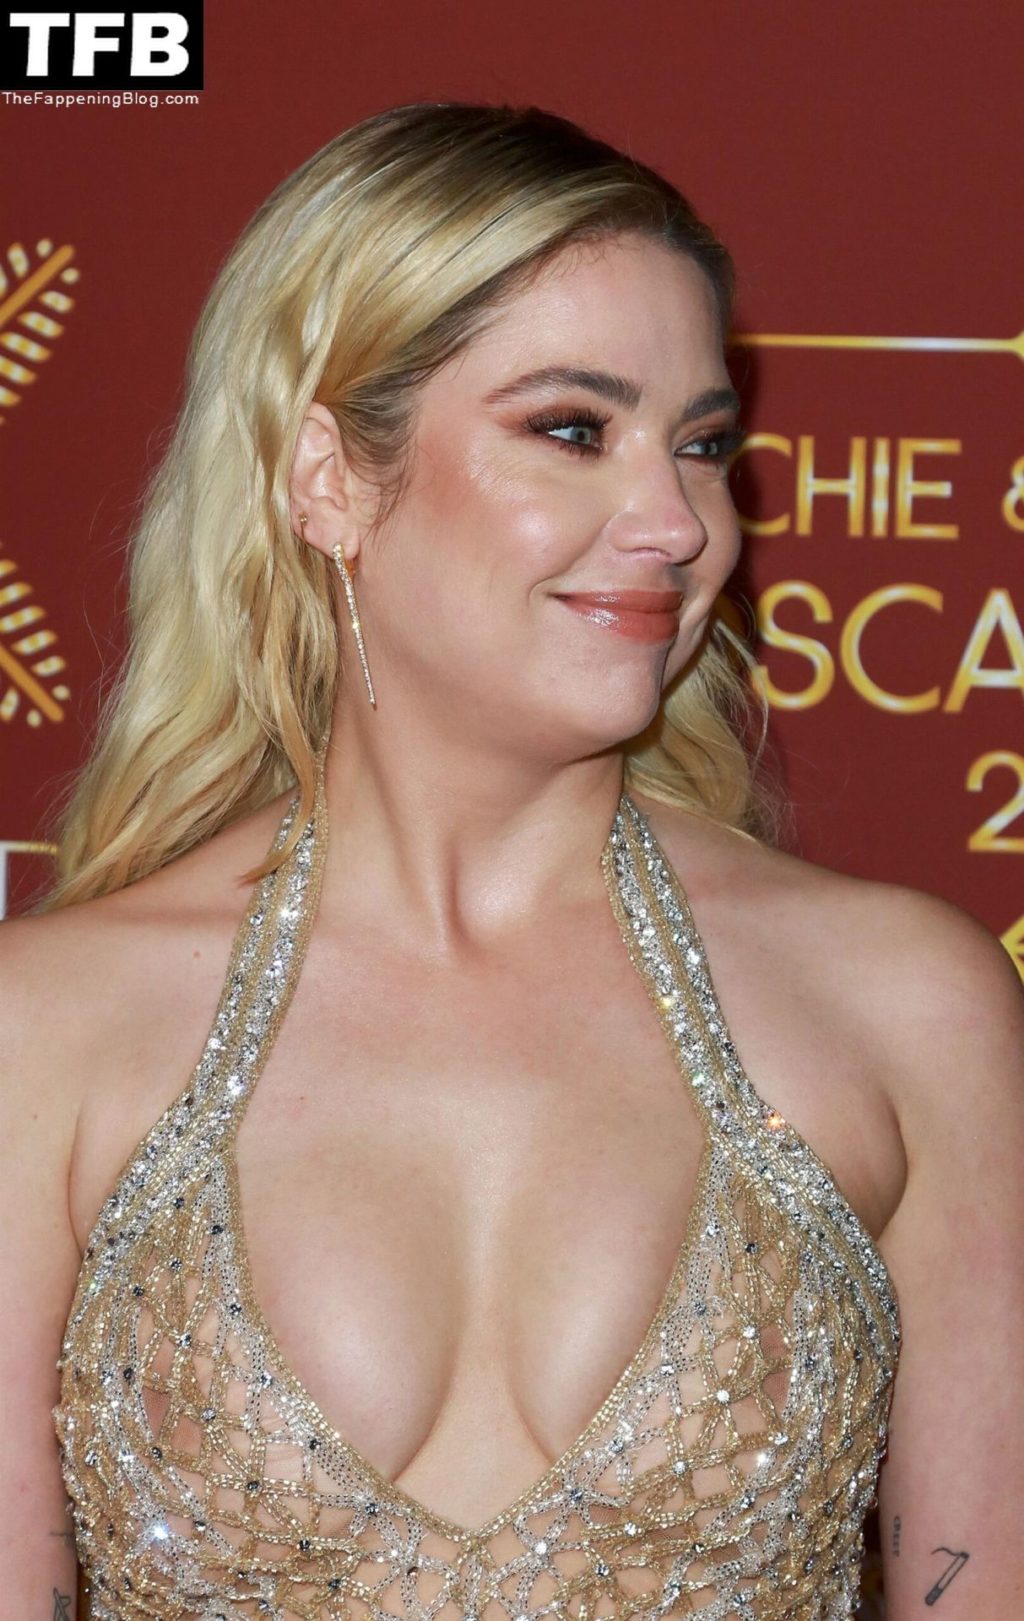 Ashley Benson Braless Boobs Nipples 16 scaled thefappeningblog.com  1024x1621 - Ashley Benson Displays Nice Cleavage at the Darren Dzienciol and Richie Akiva Oscar Party (39 Photos)